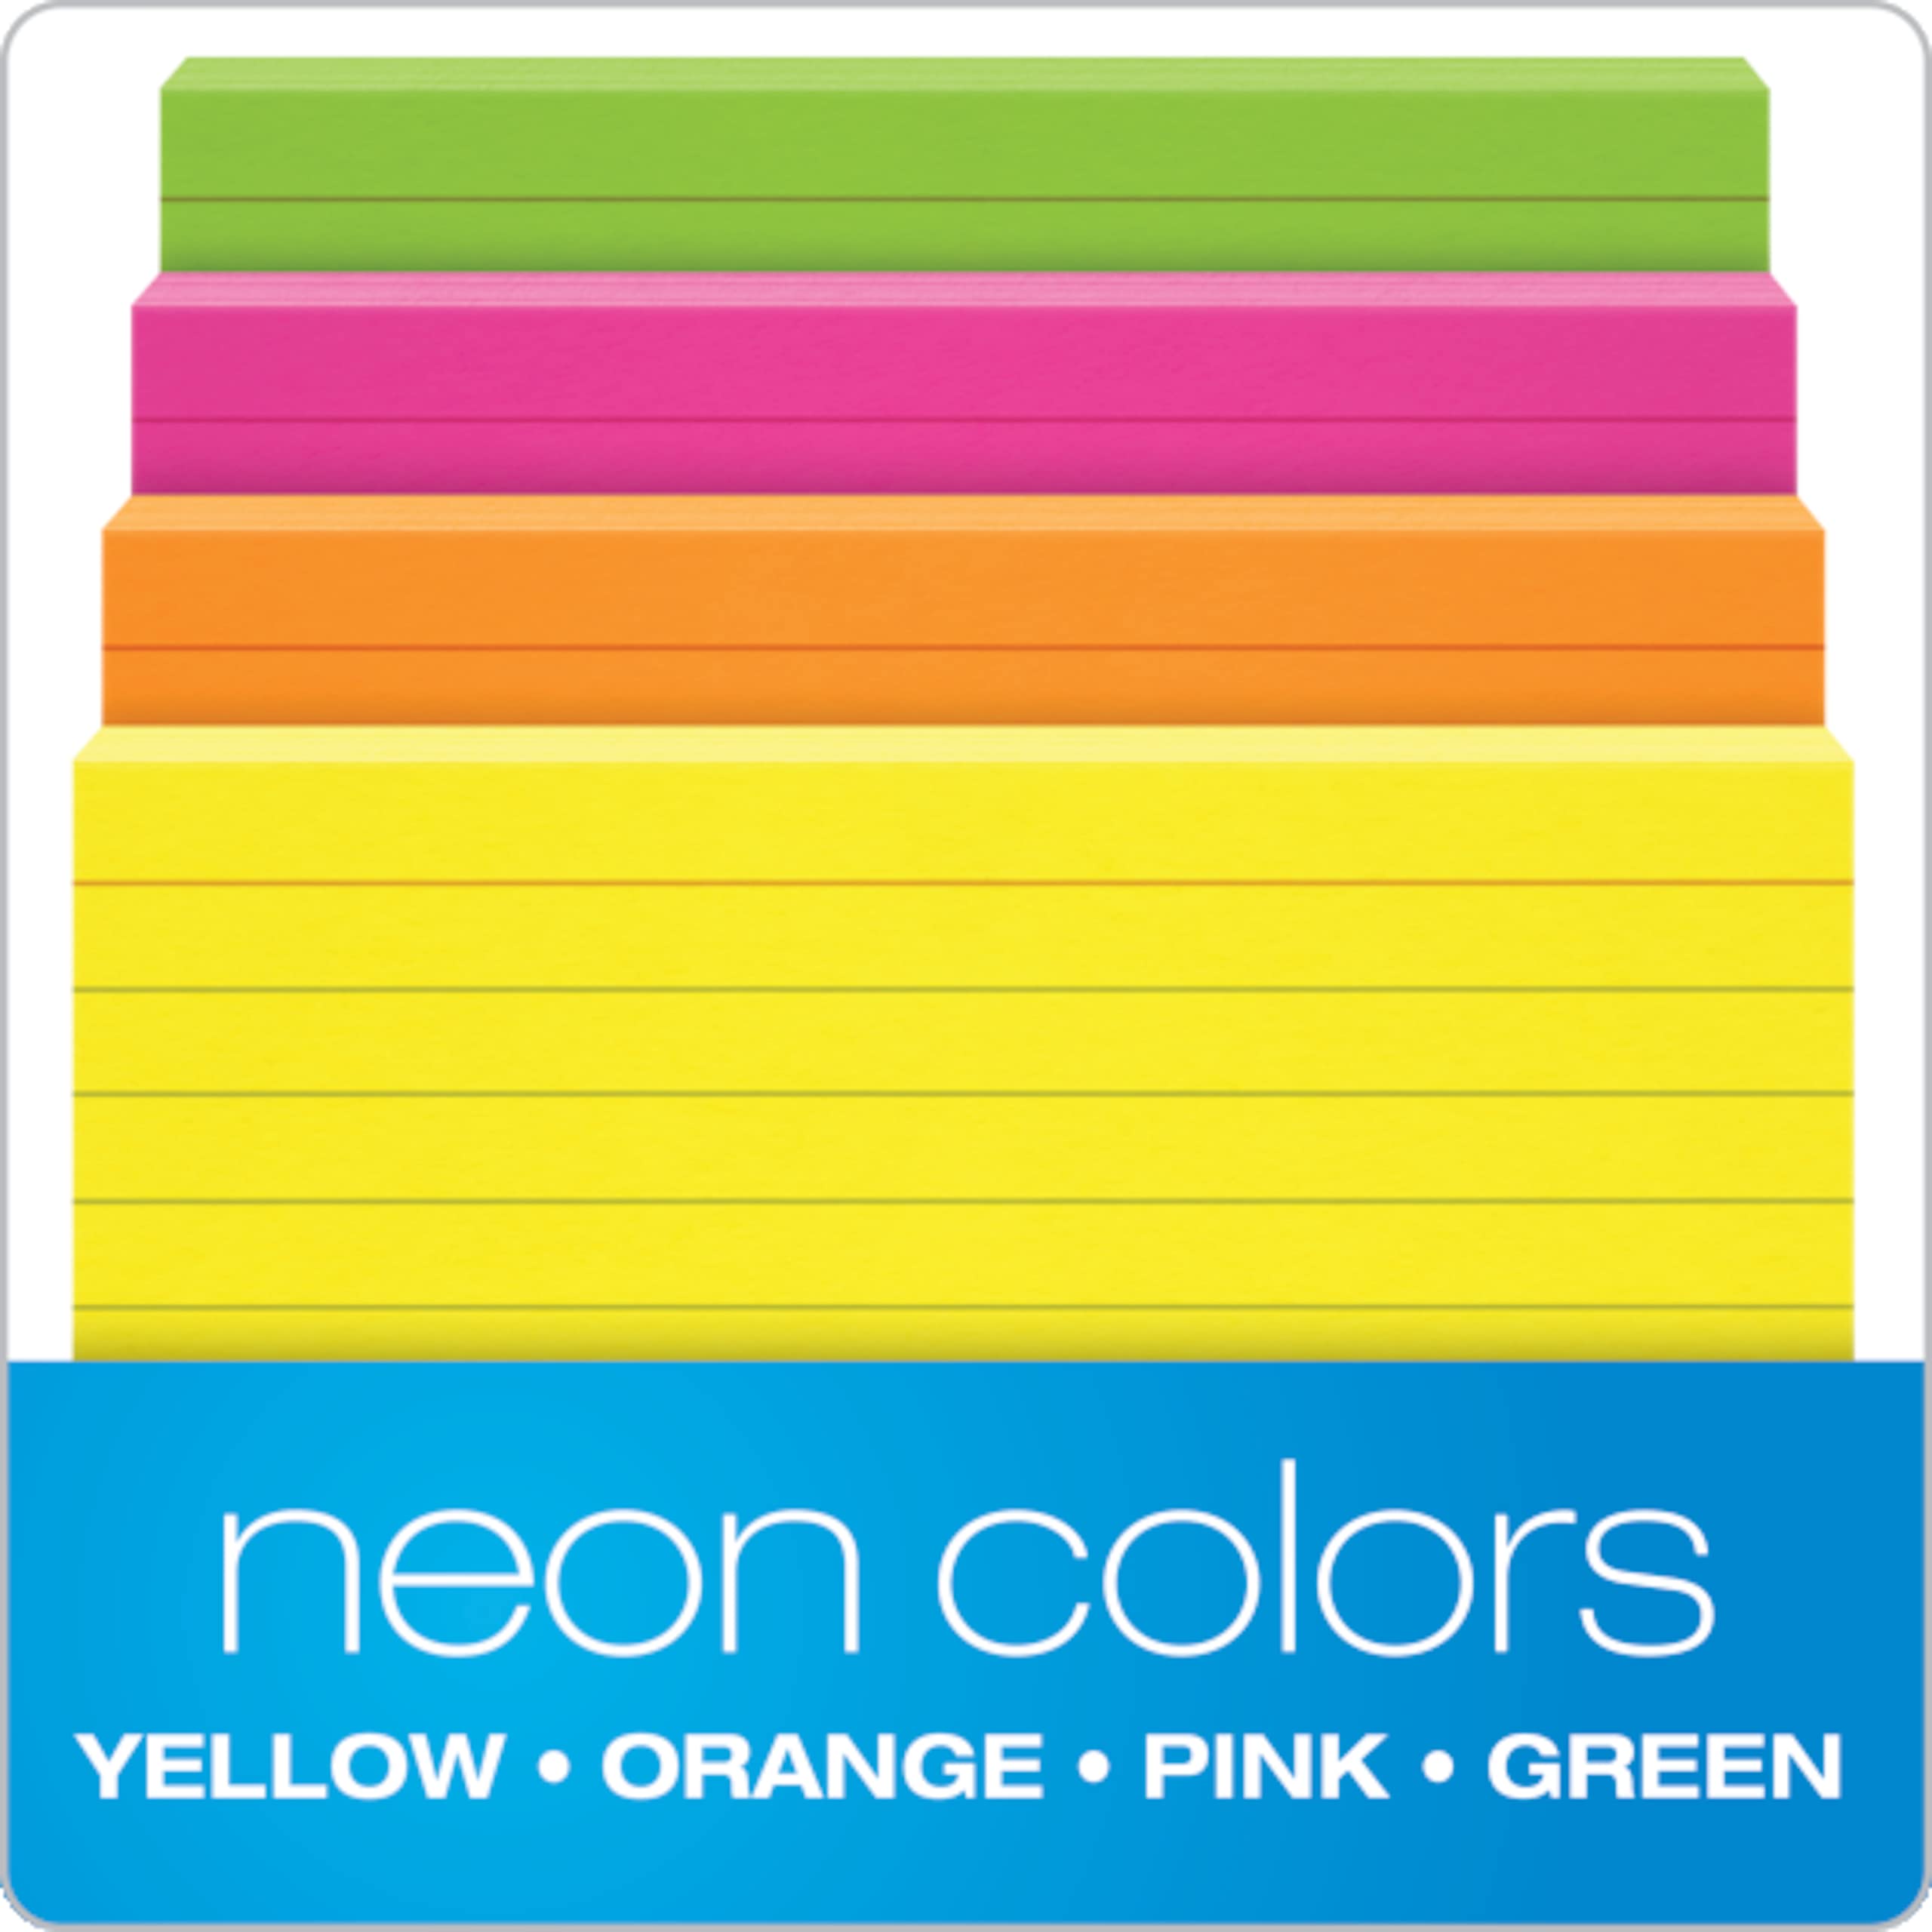 Oxford Neon Index Cards, 3" x 5", Ruled, Assorted Colors, 300 Per Pack (81300EE)